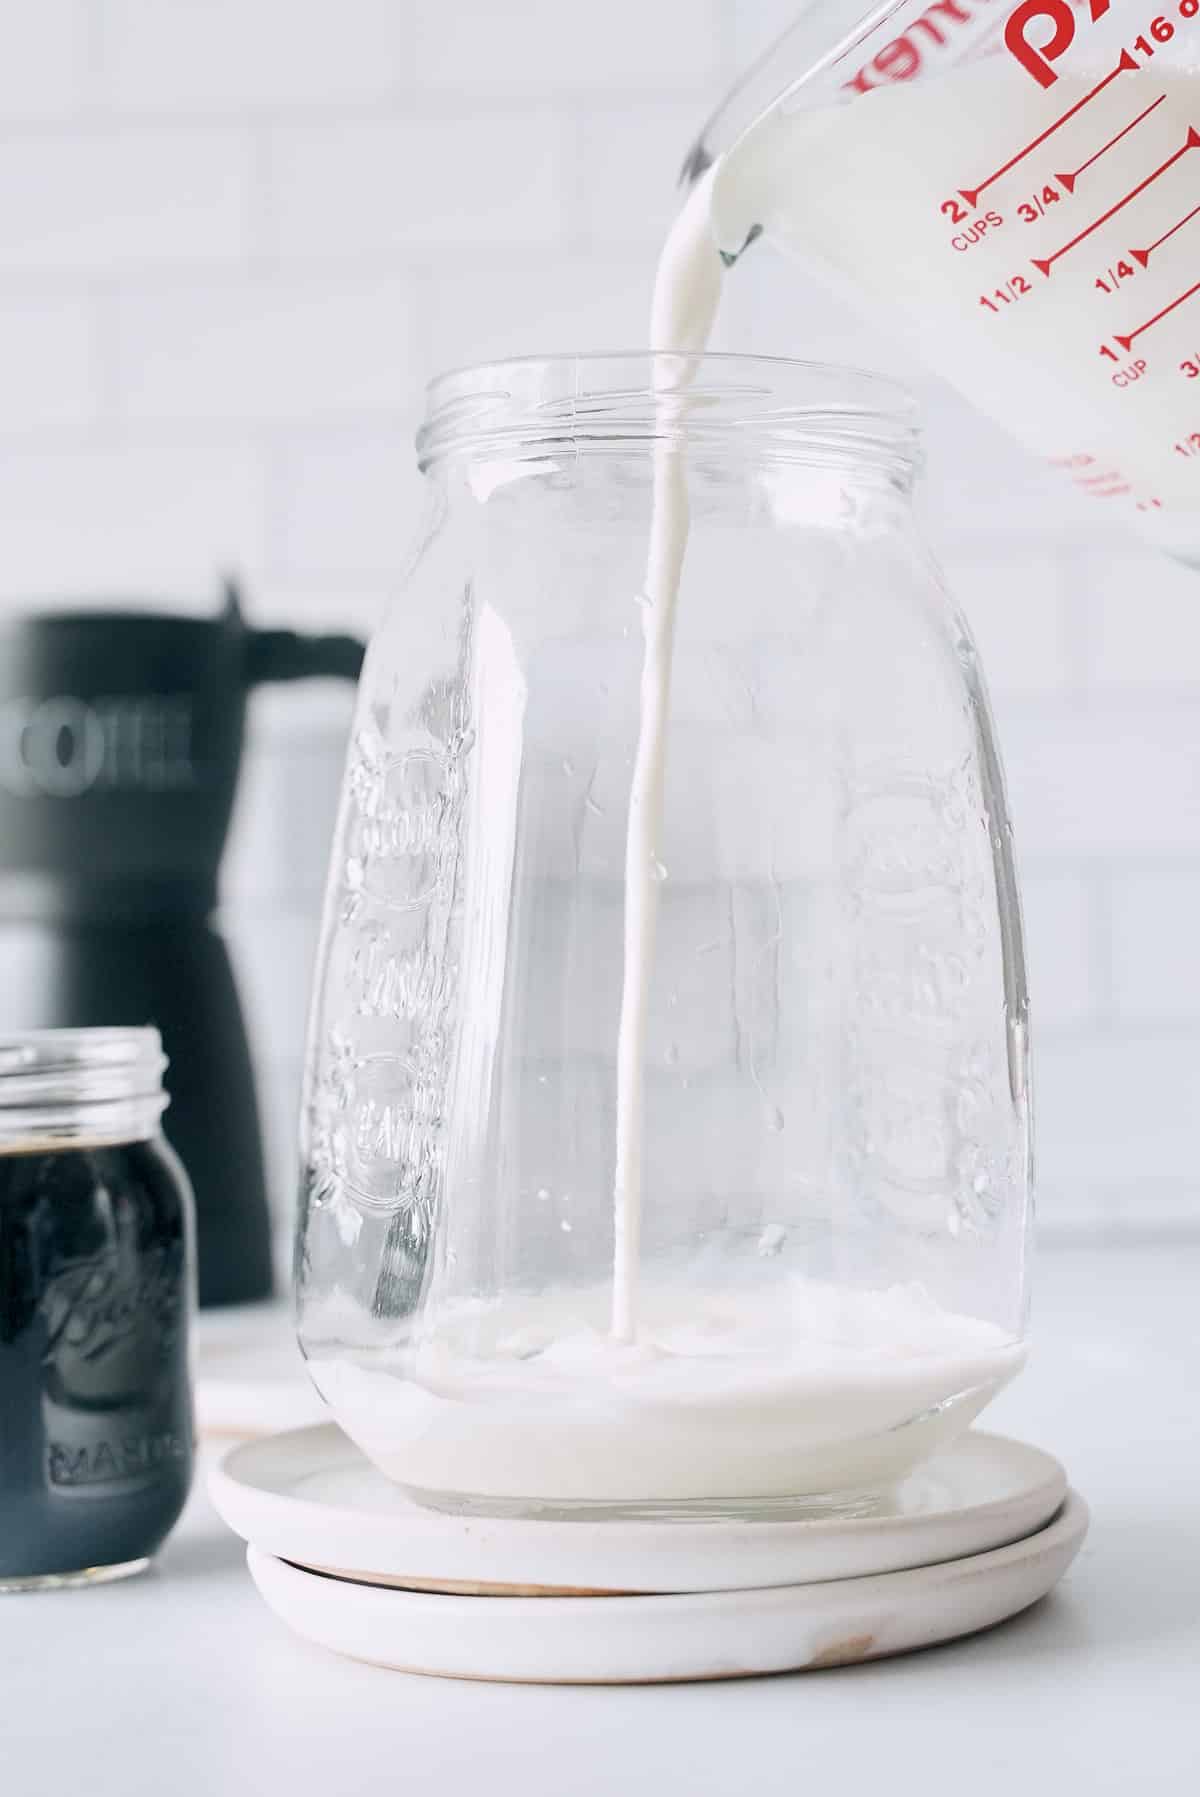 Pouring cream into a large glass container.